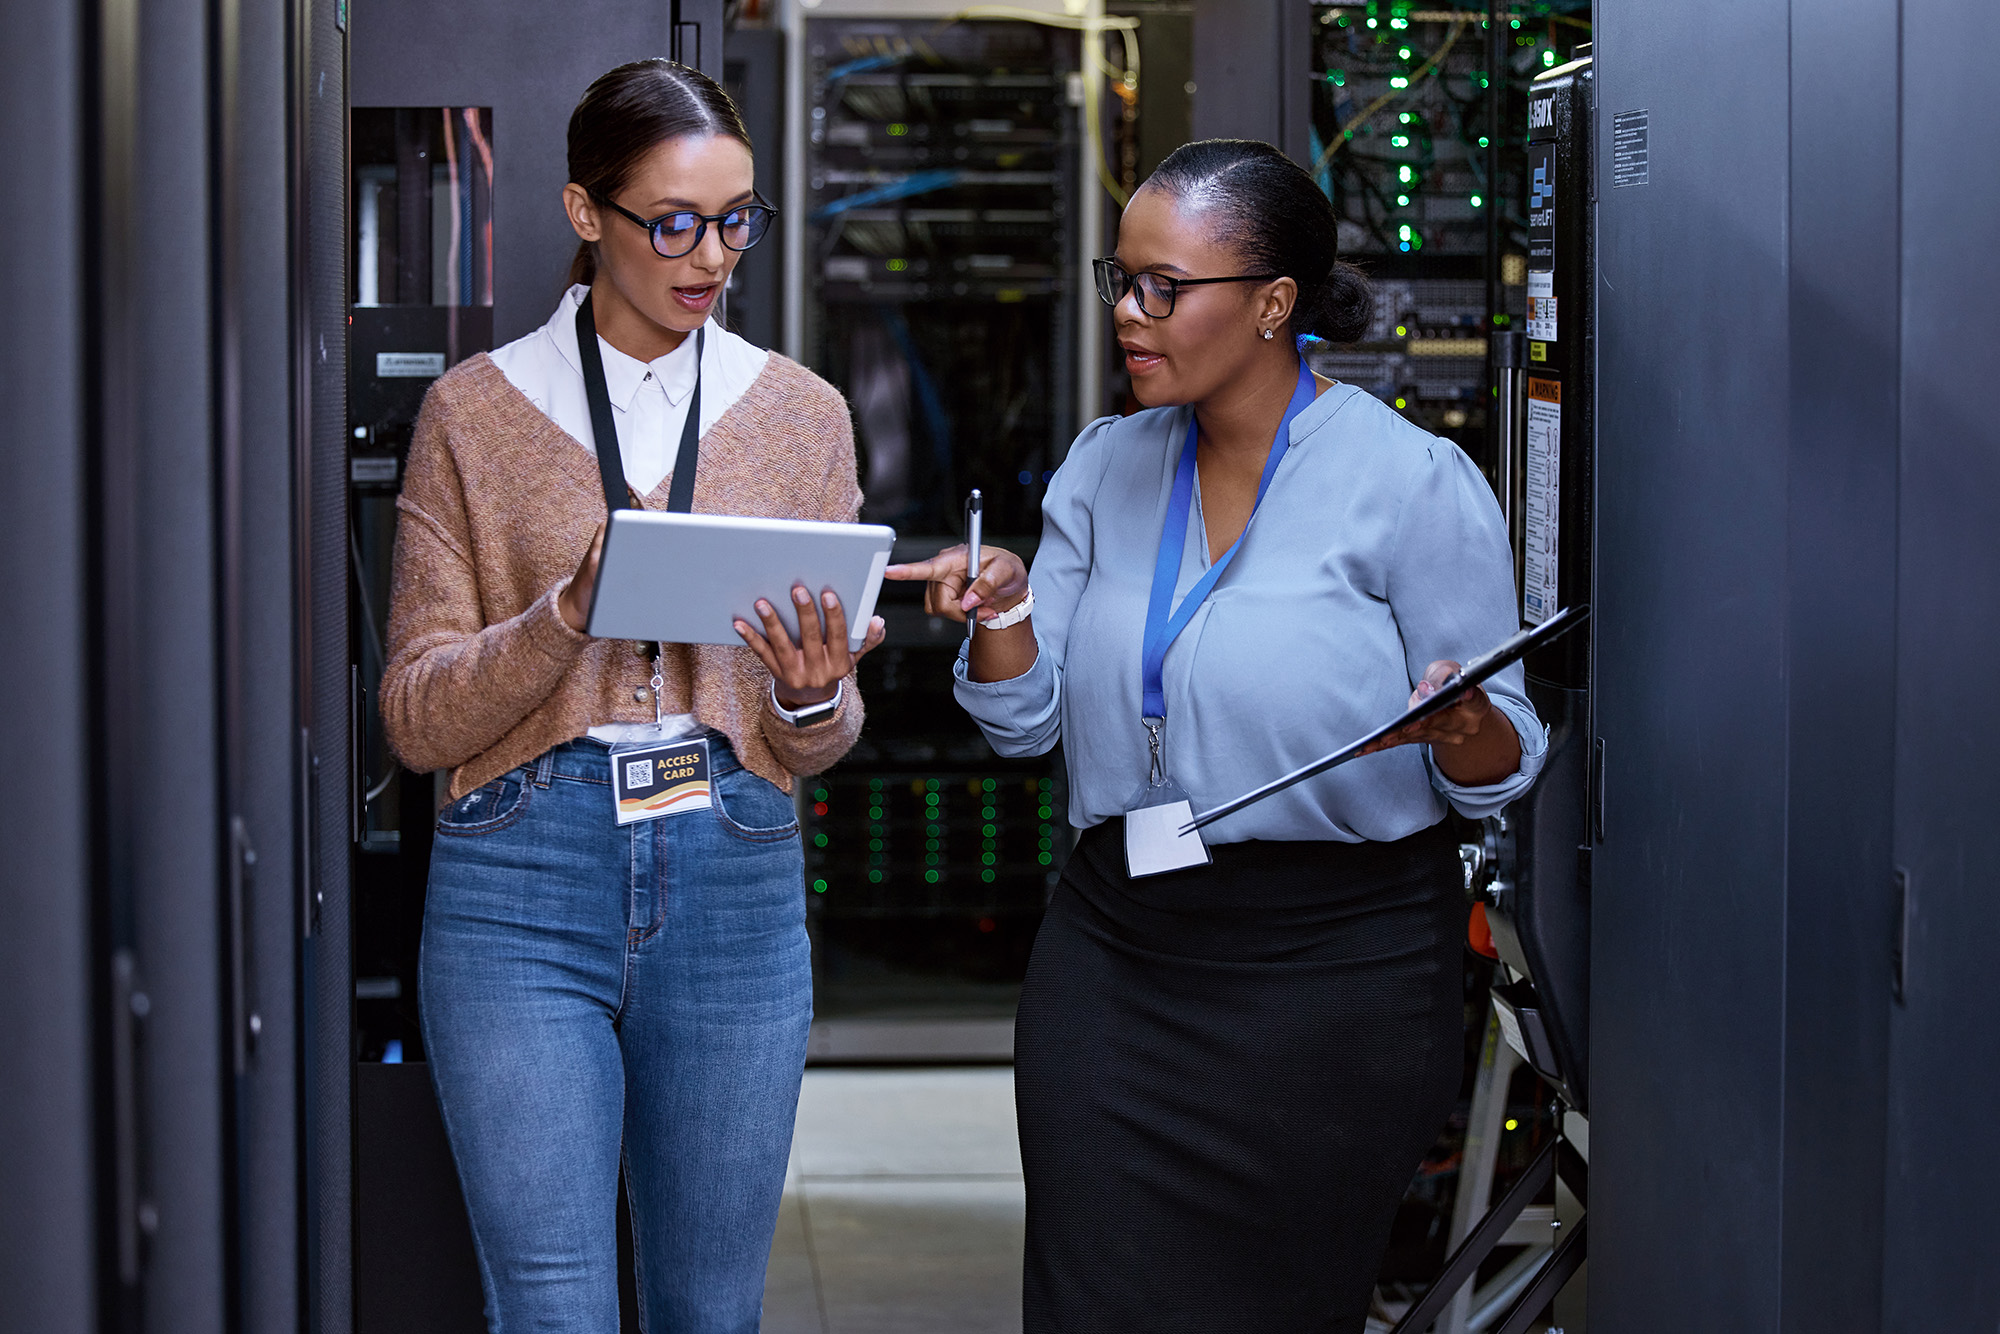 Importance of Privacy and Cybersecurity: Two female IT professionals working in a server room.